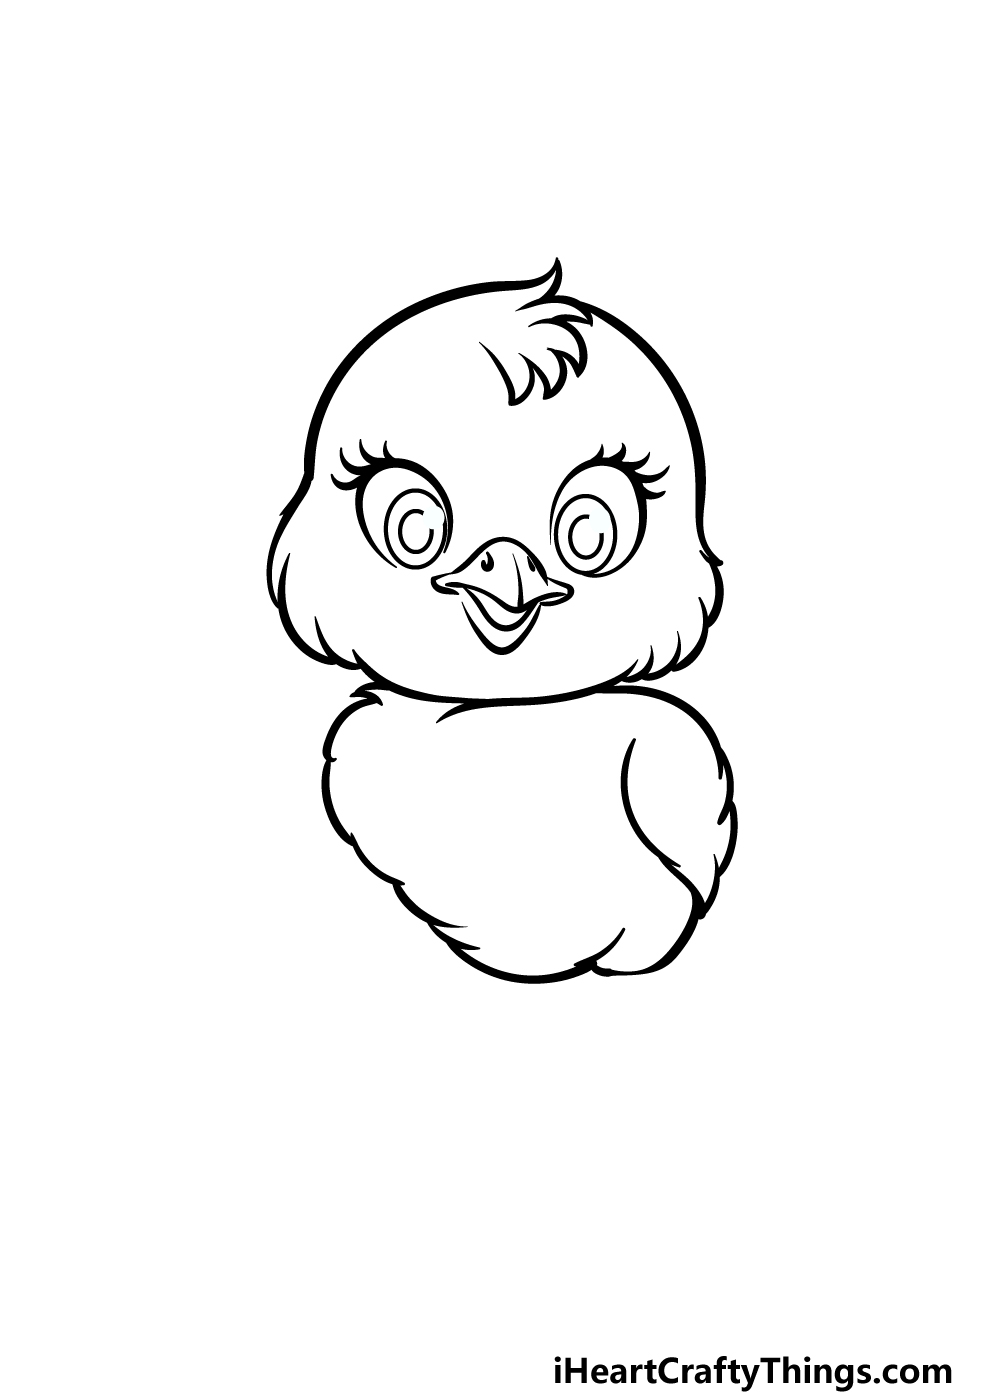 Baby Chick Drawing Image